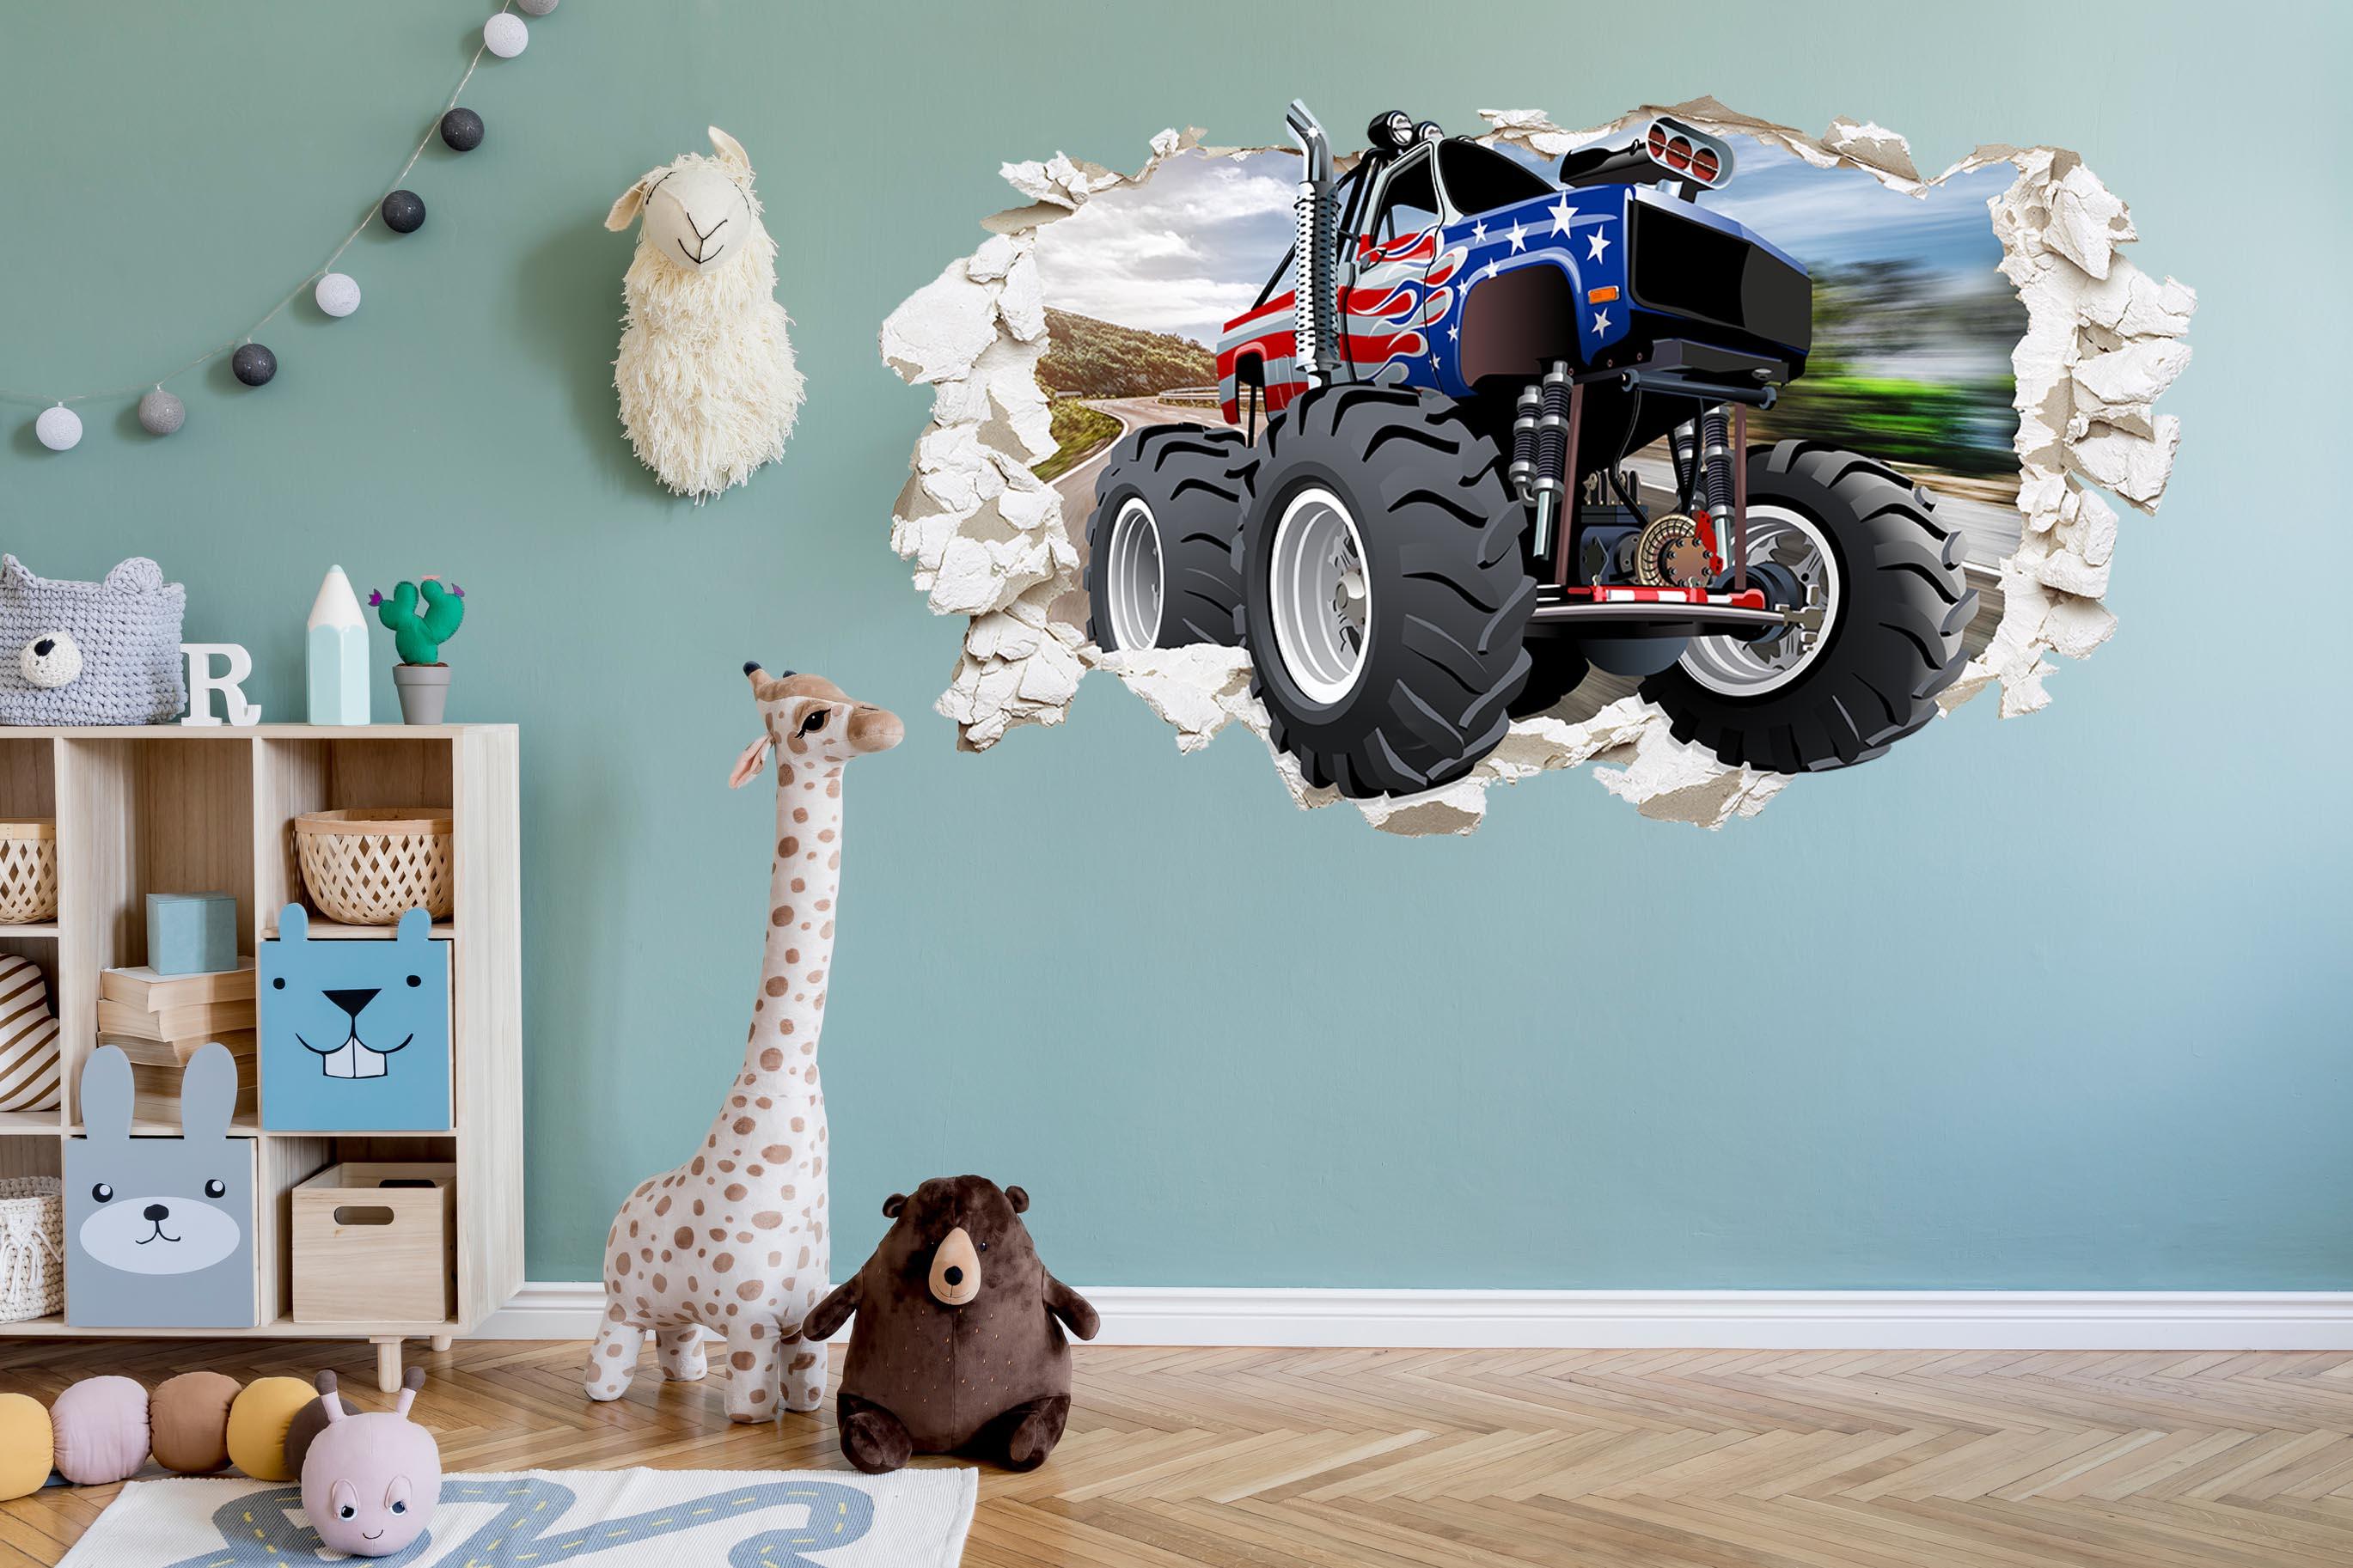 Monster Truck 3D Plaster Wall Hole with American flag, Wall Decal Sticker, Removable 002